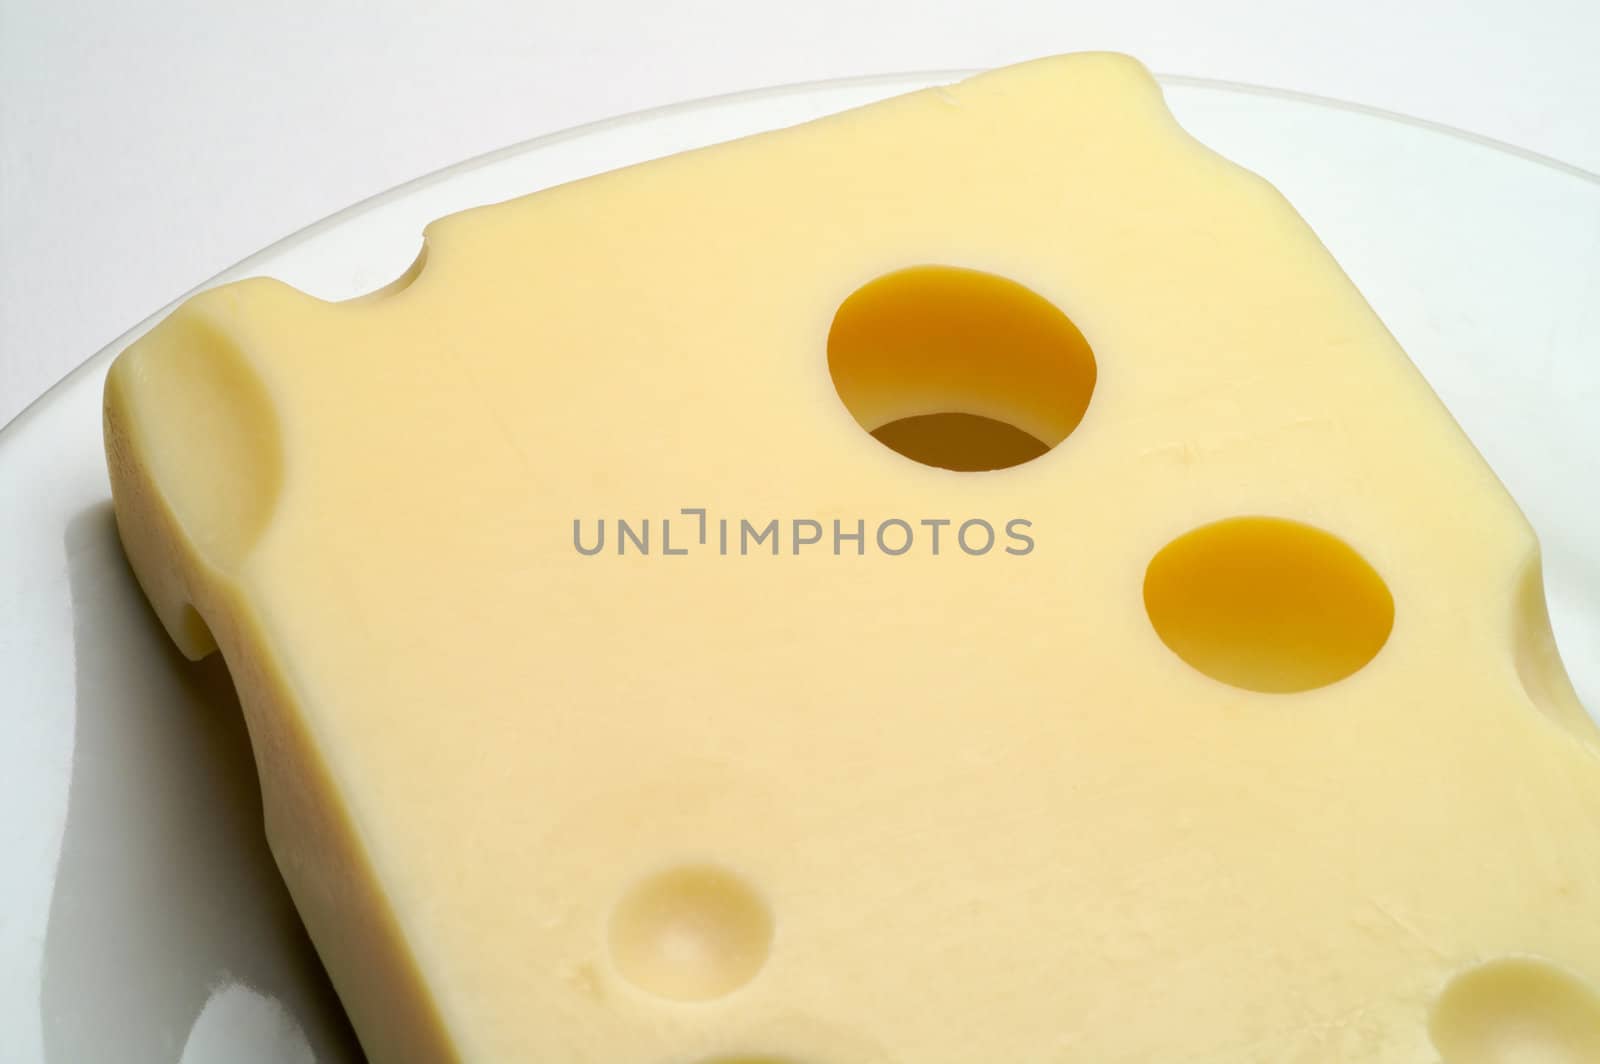 Cheese: Emmental